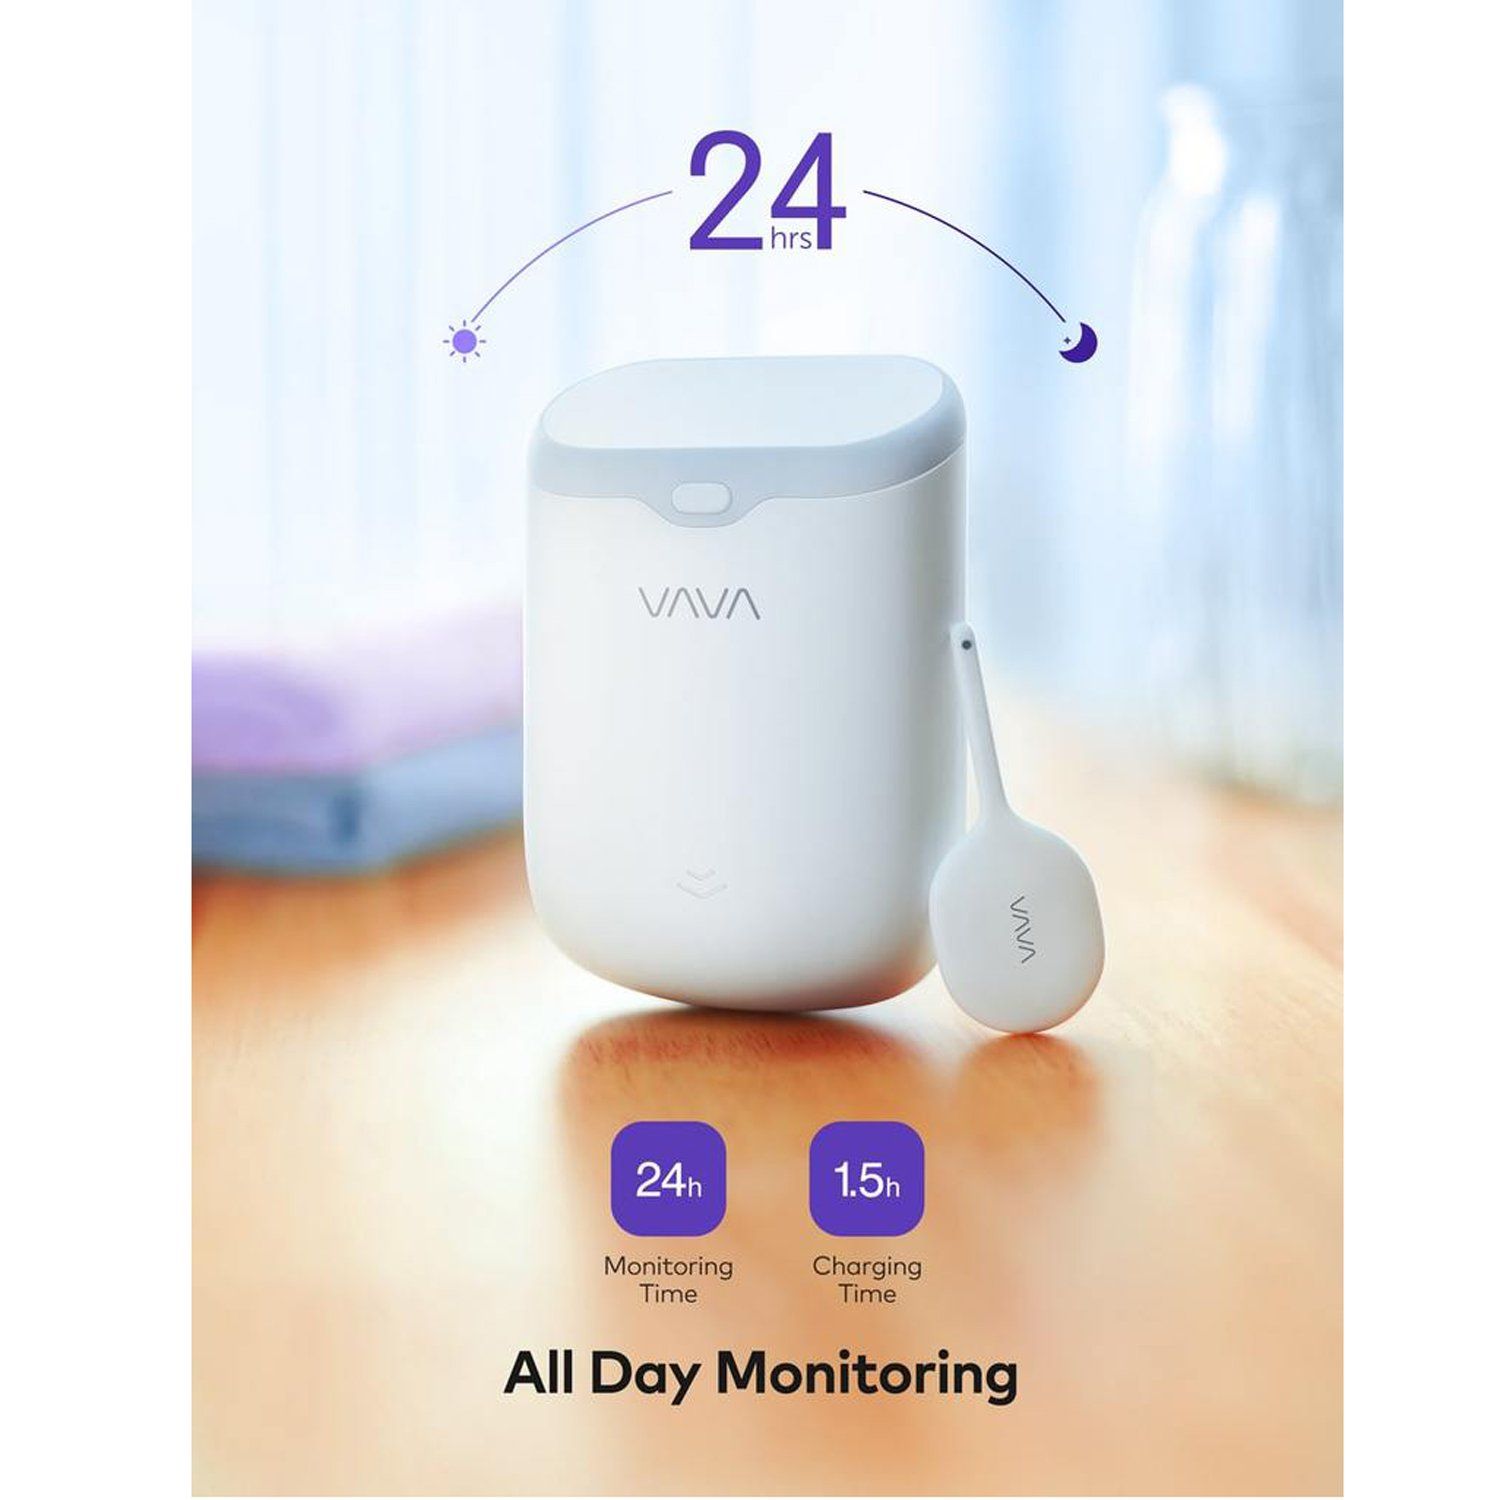 VAVA VA-IH008 Smart Baby Thermometer Instant beep alerts with blinking LED light notification, White Default VAVA 